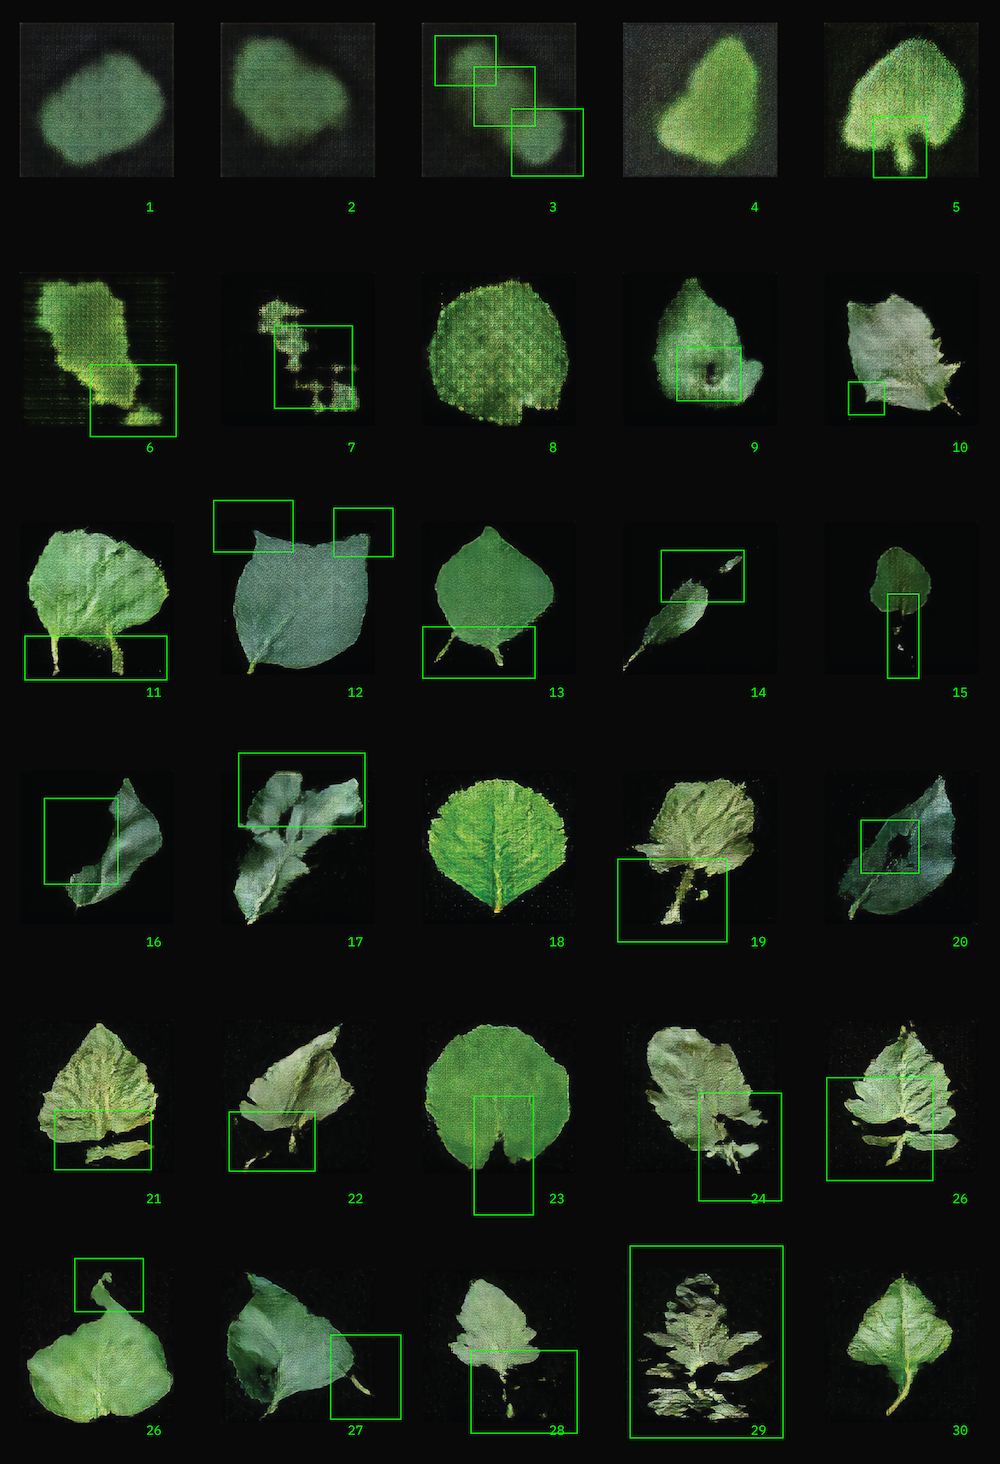 green generated leaves on a black background with bright green rectangles in various locations.